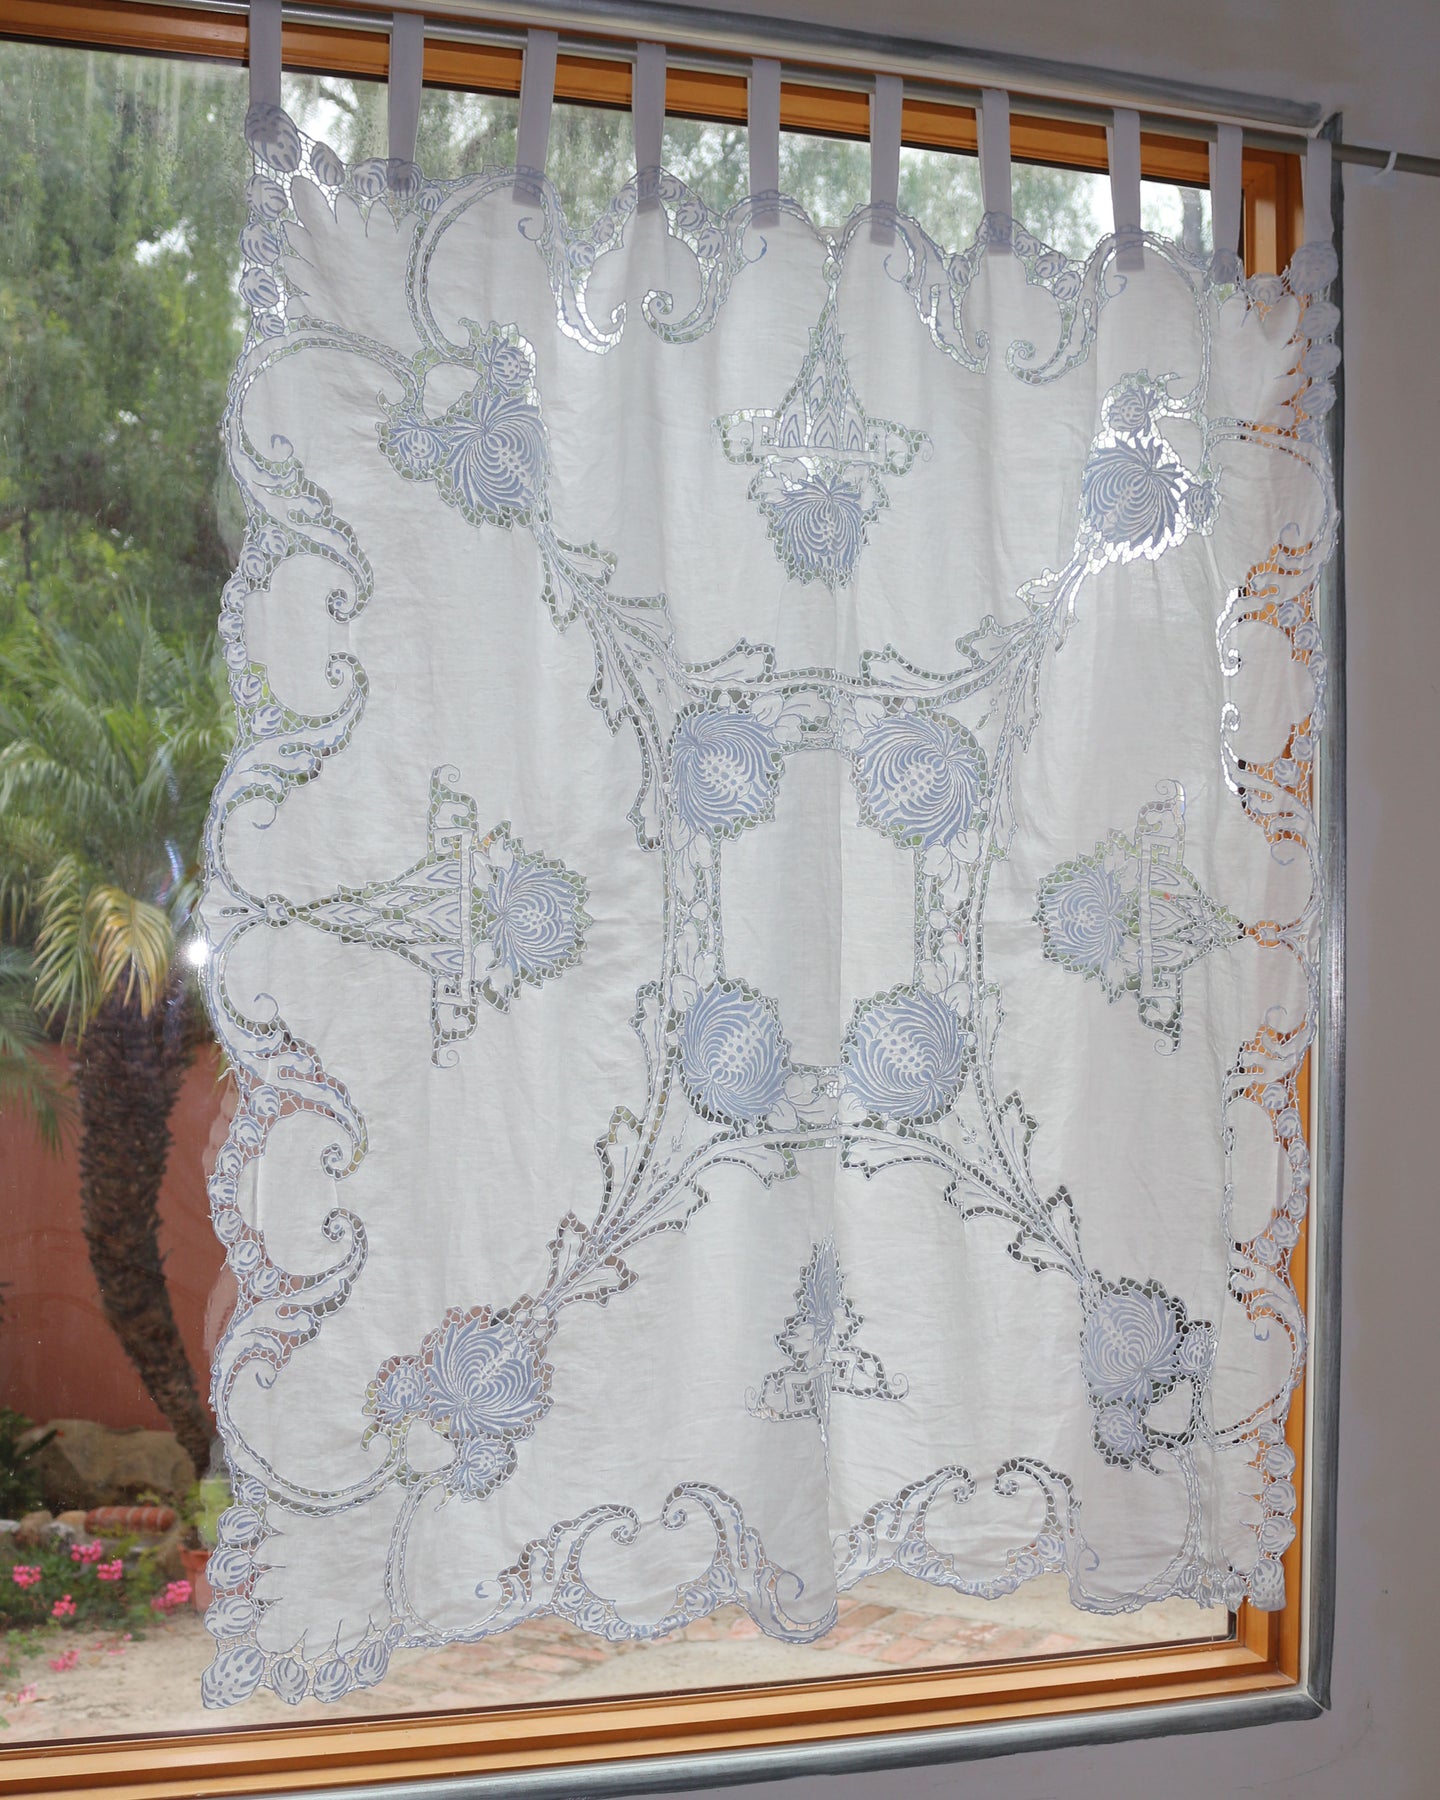 Window Panel- Repurposed from Vintage tablecloth.